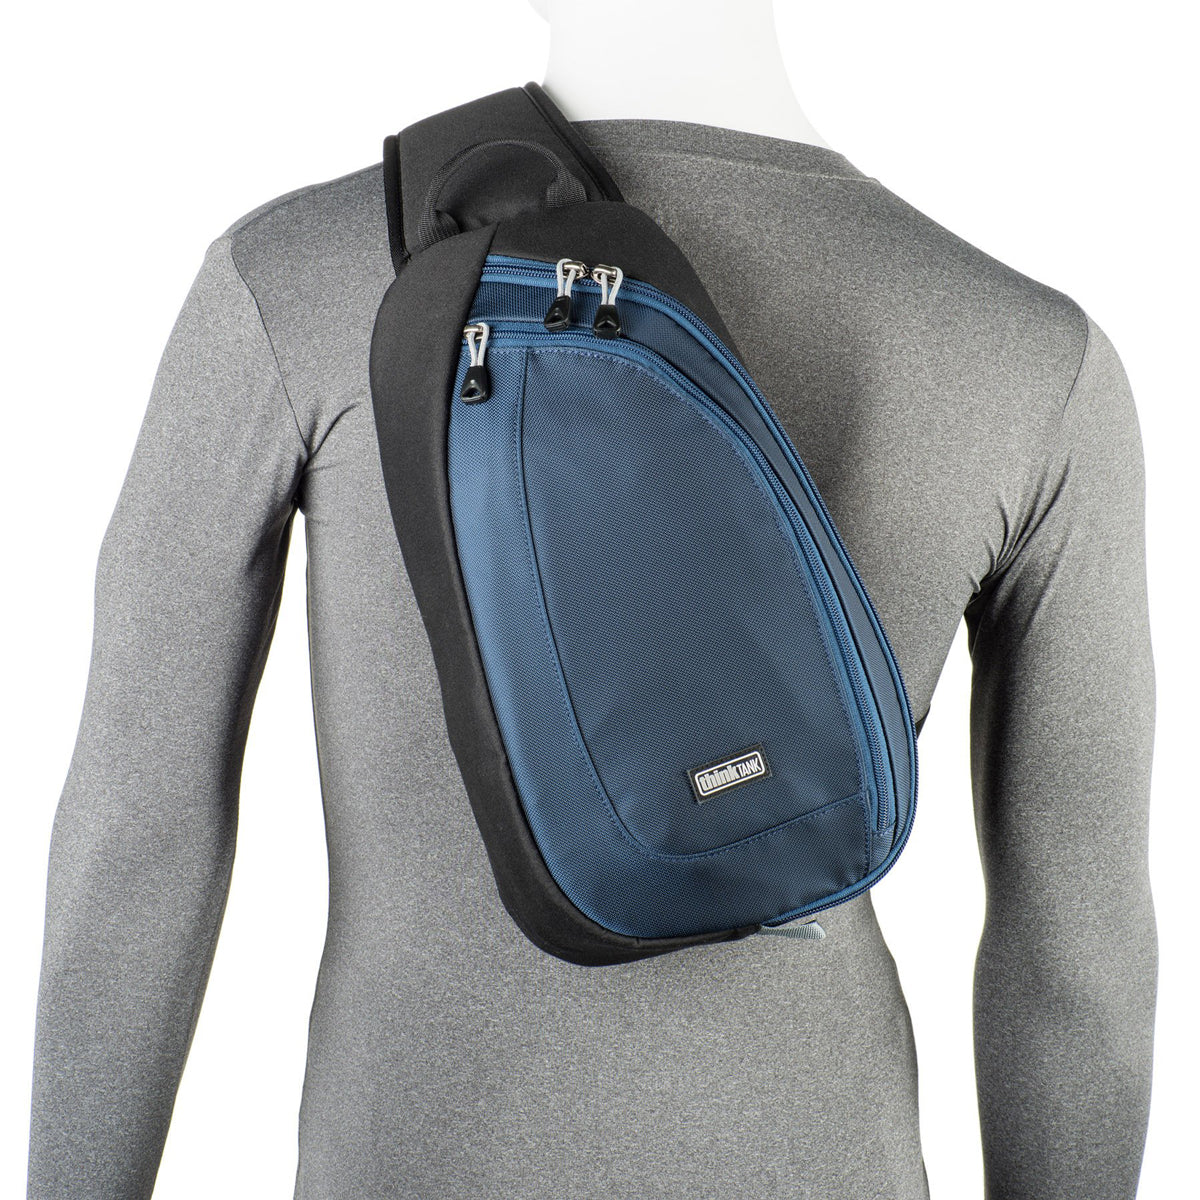 Think Tank TurnStyle 10 V2.0 (Charcoal)